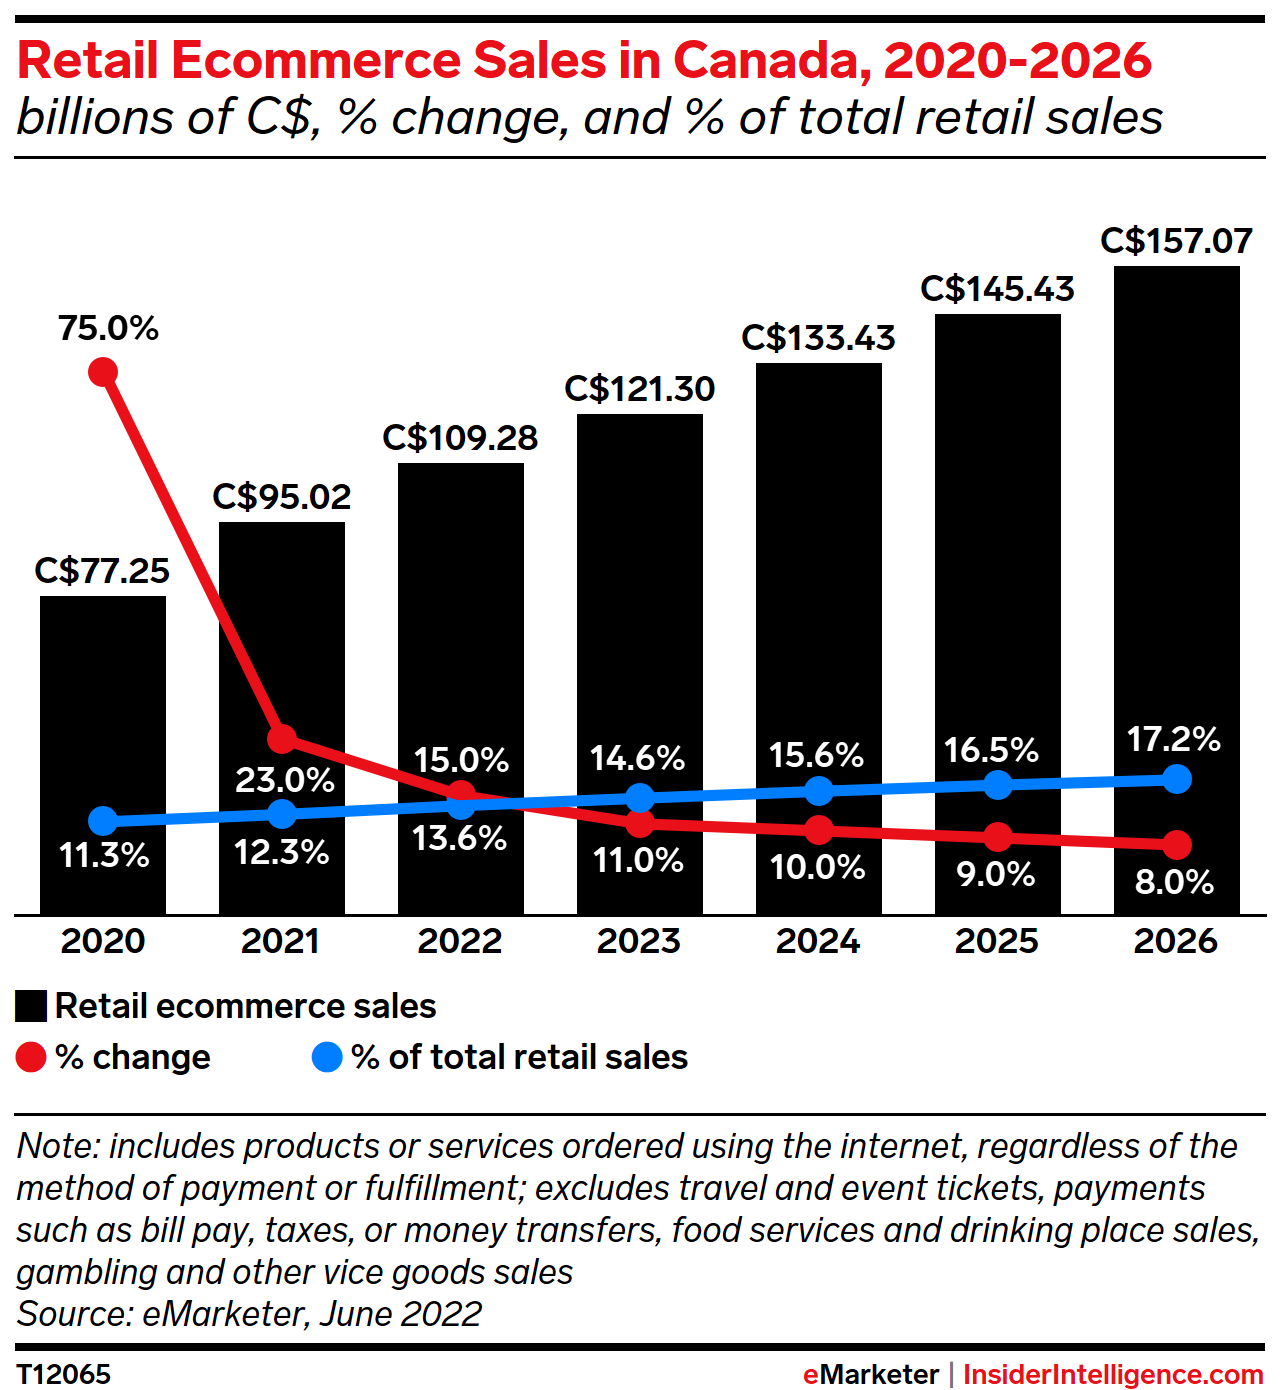 Retail Ecommerce Sales in Canada, 2020-2026 (billions of C$, % change, and % of total retail sales)